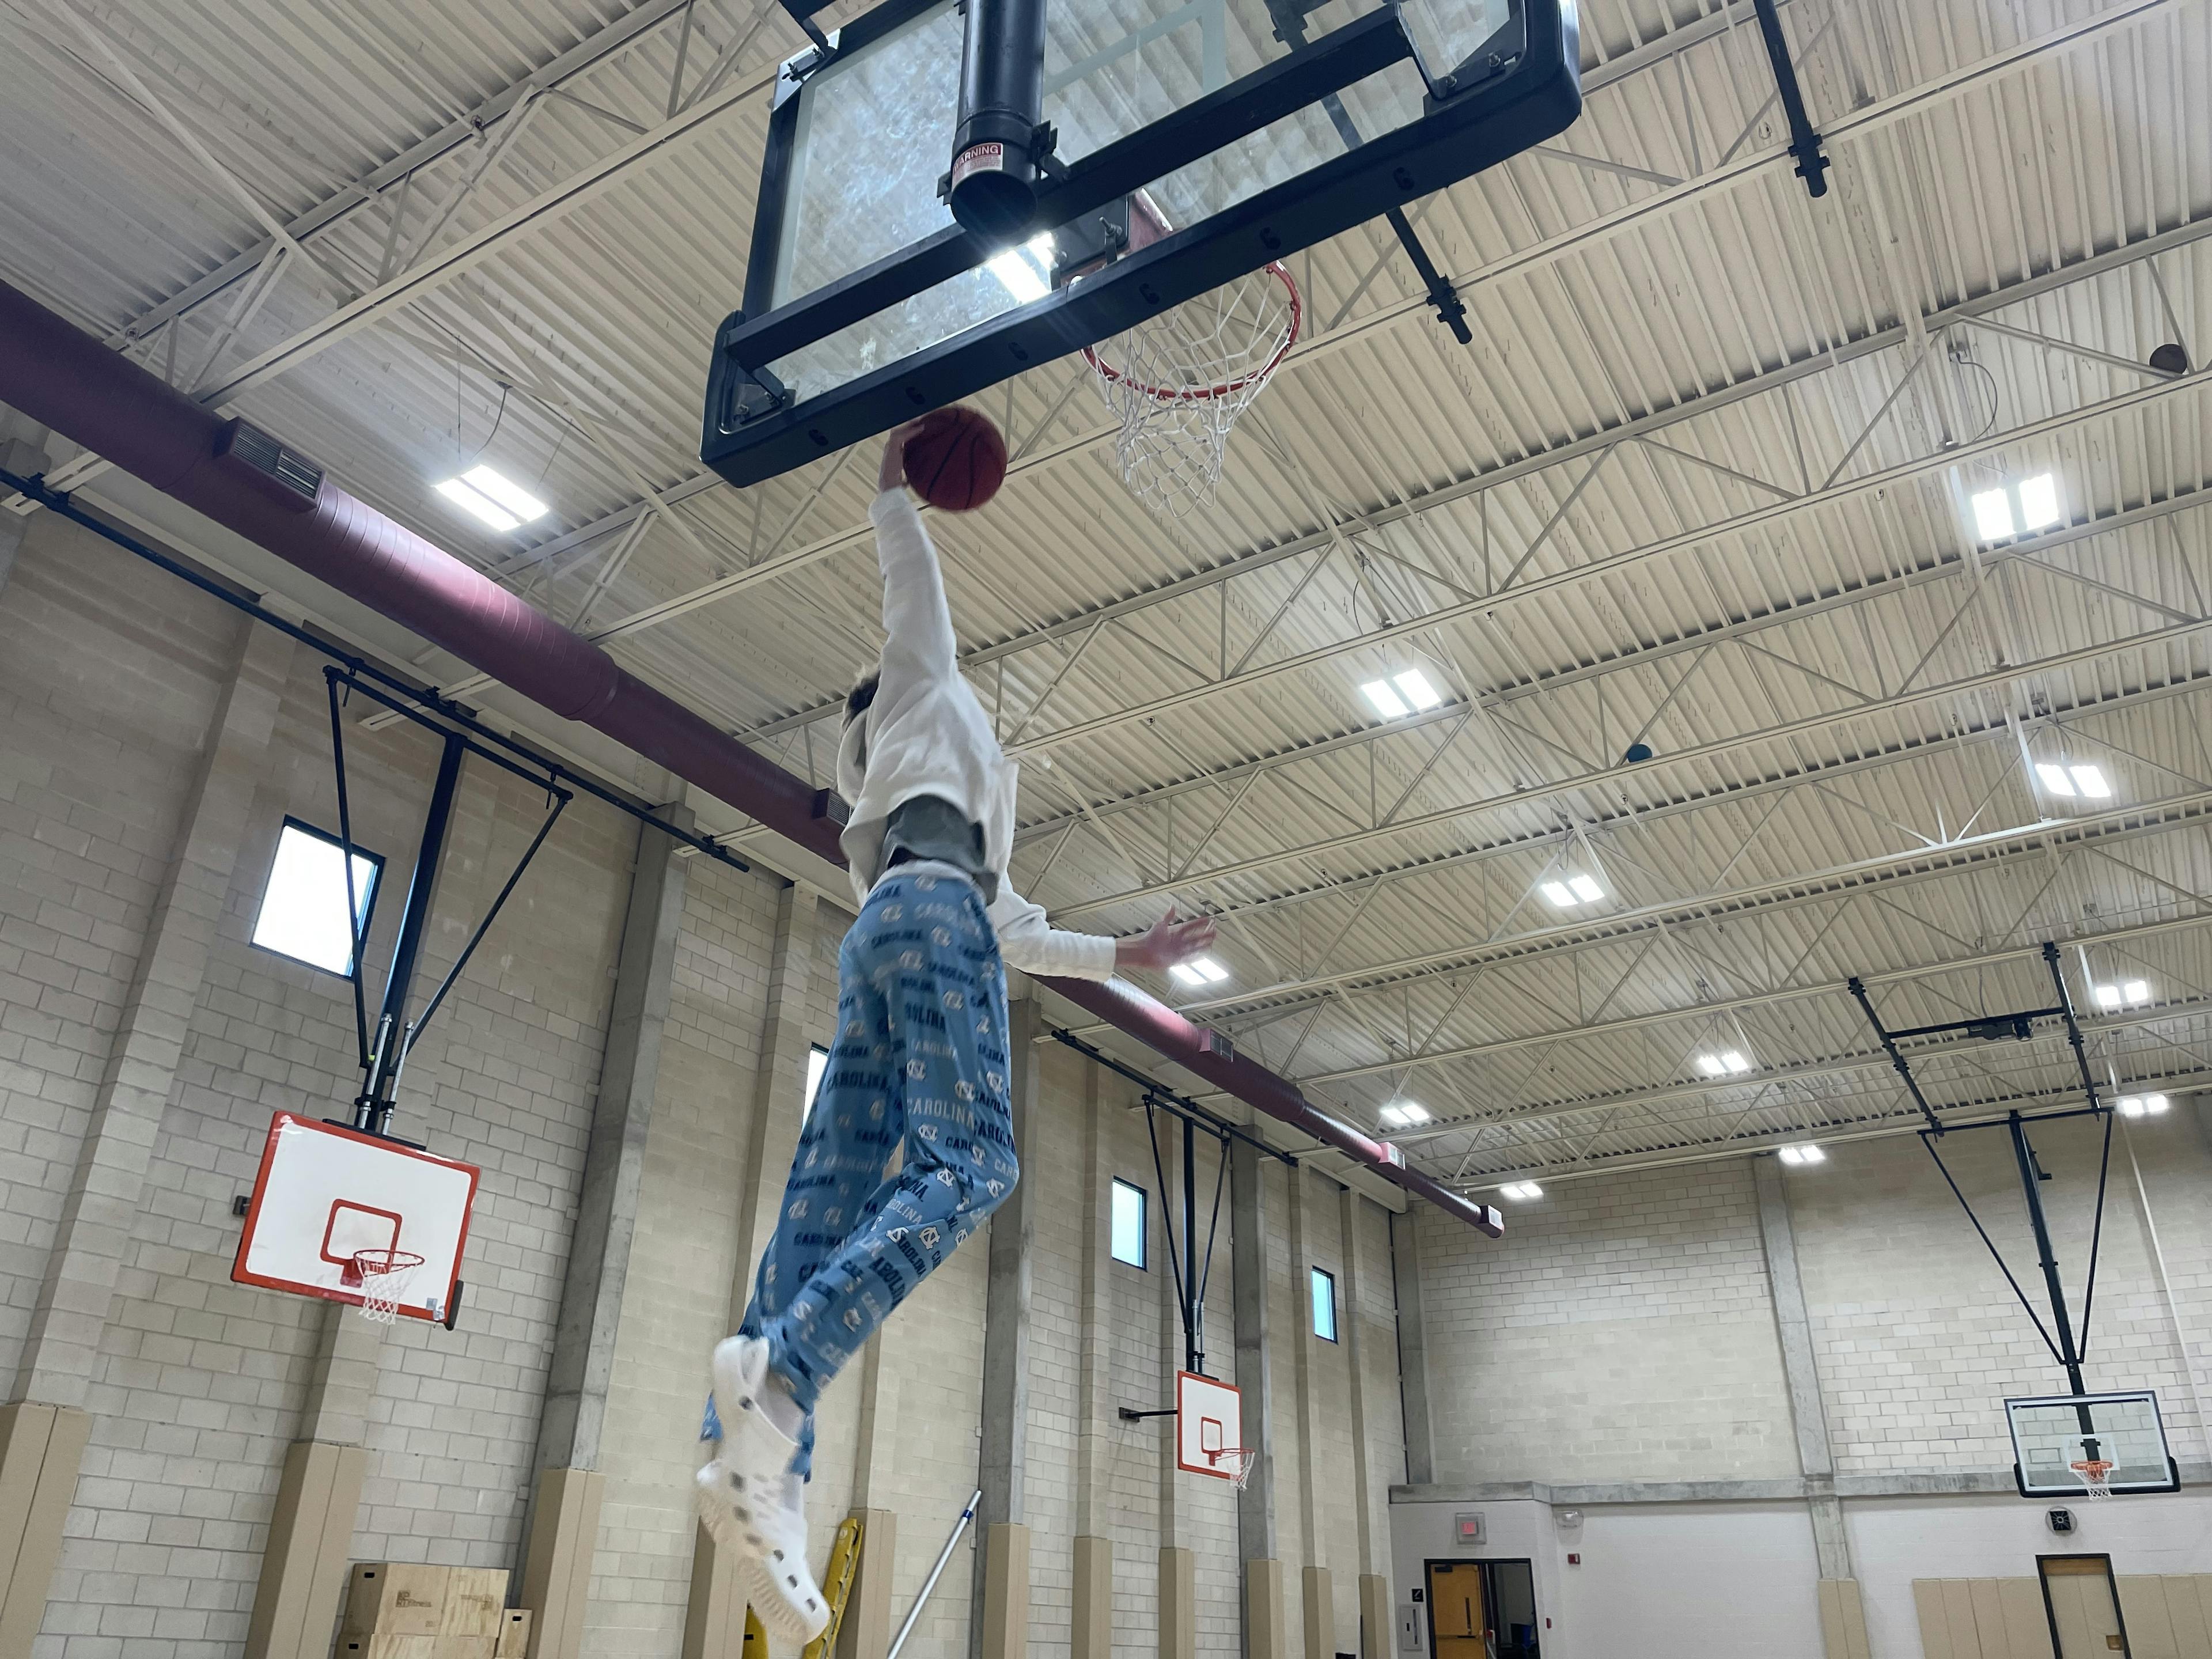 Photographic Proof: Altamont Students Can Write News Stories, Dunk in PJs and Crocs